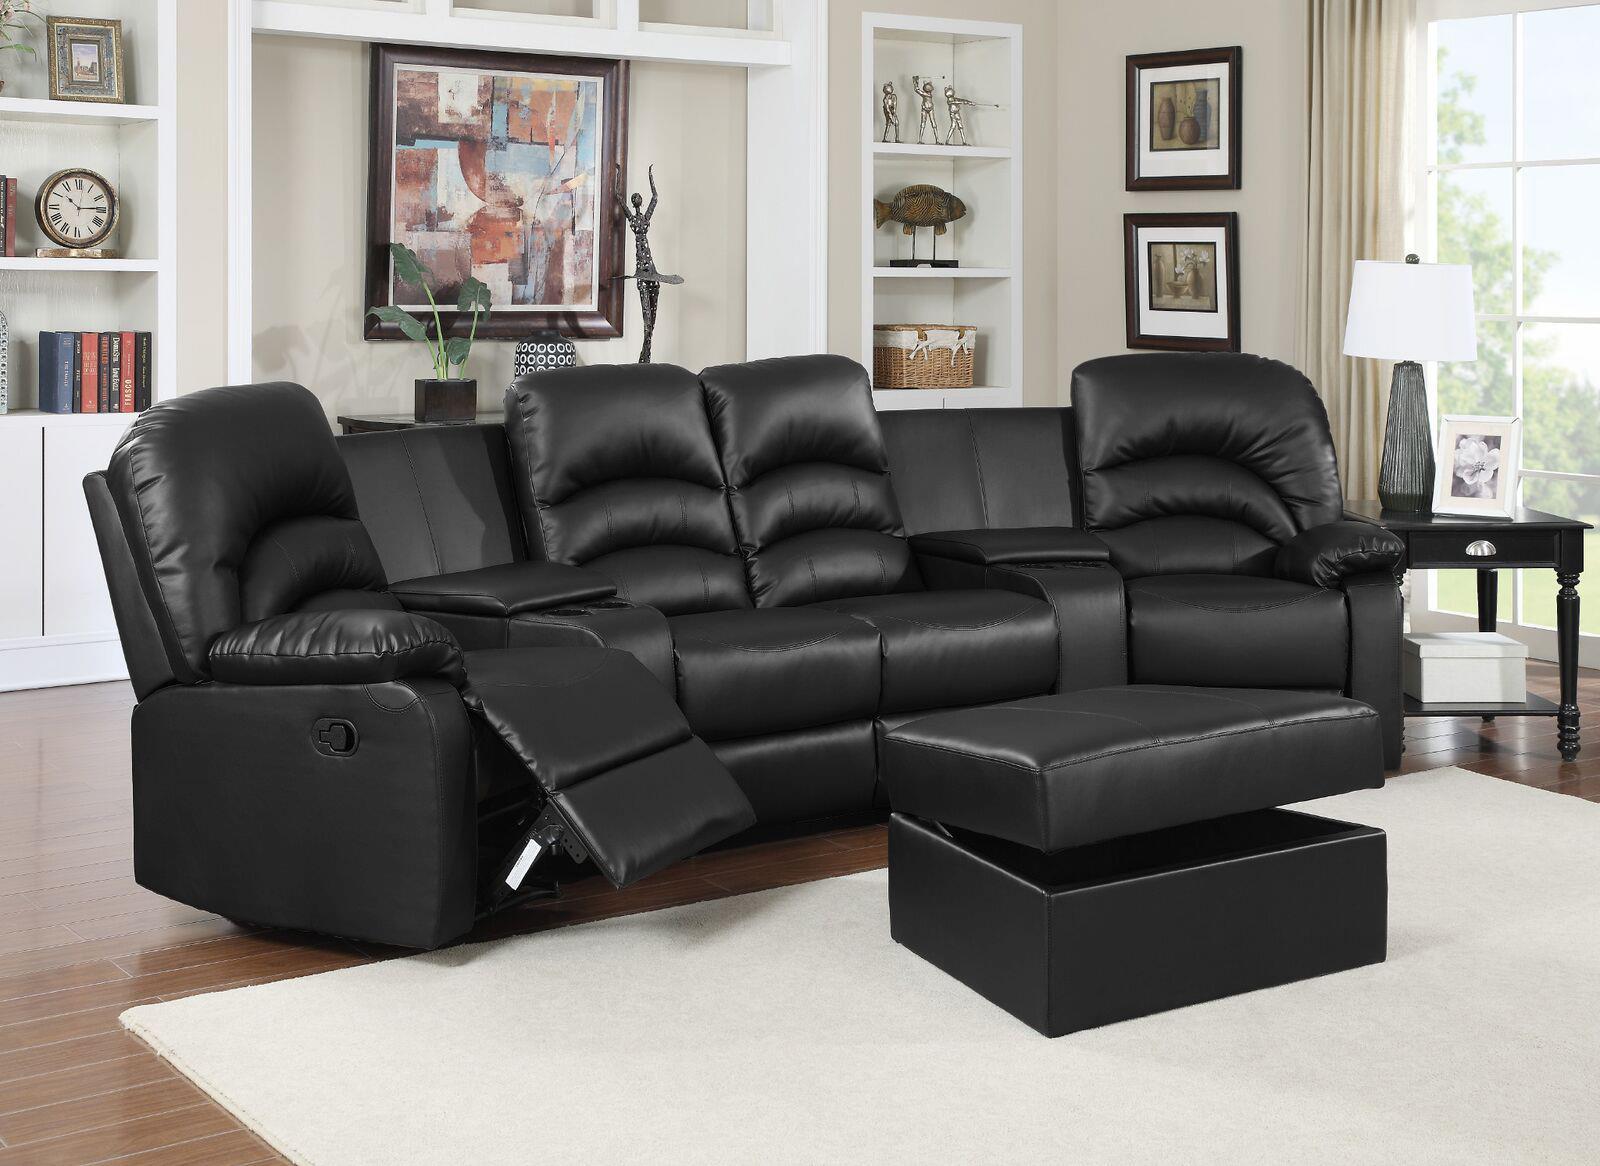 

    
Soflex Lyra Reclining Black Leather Sectional w/Ottoman Home Theater Seats
